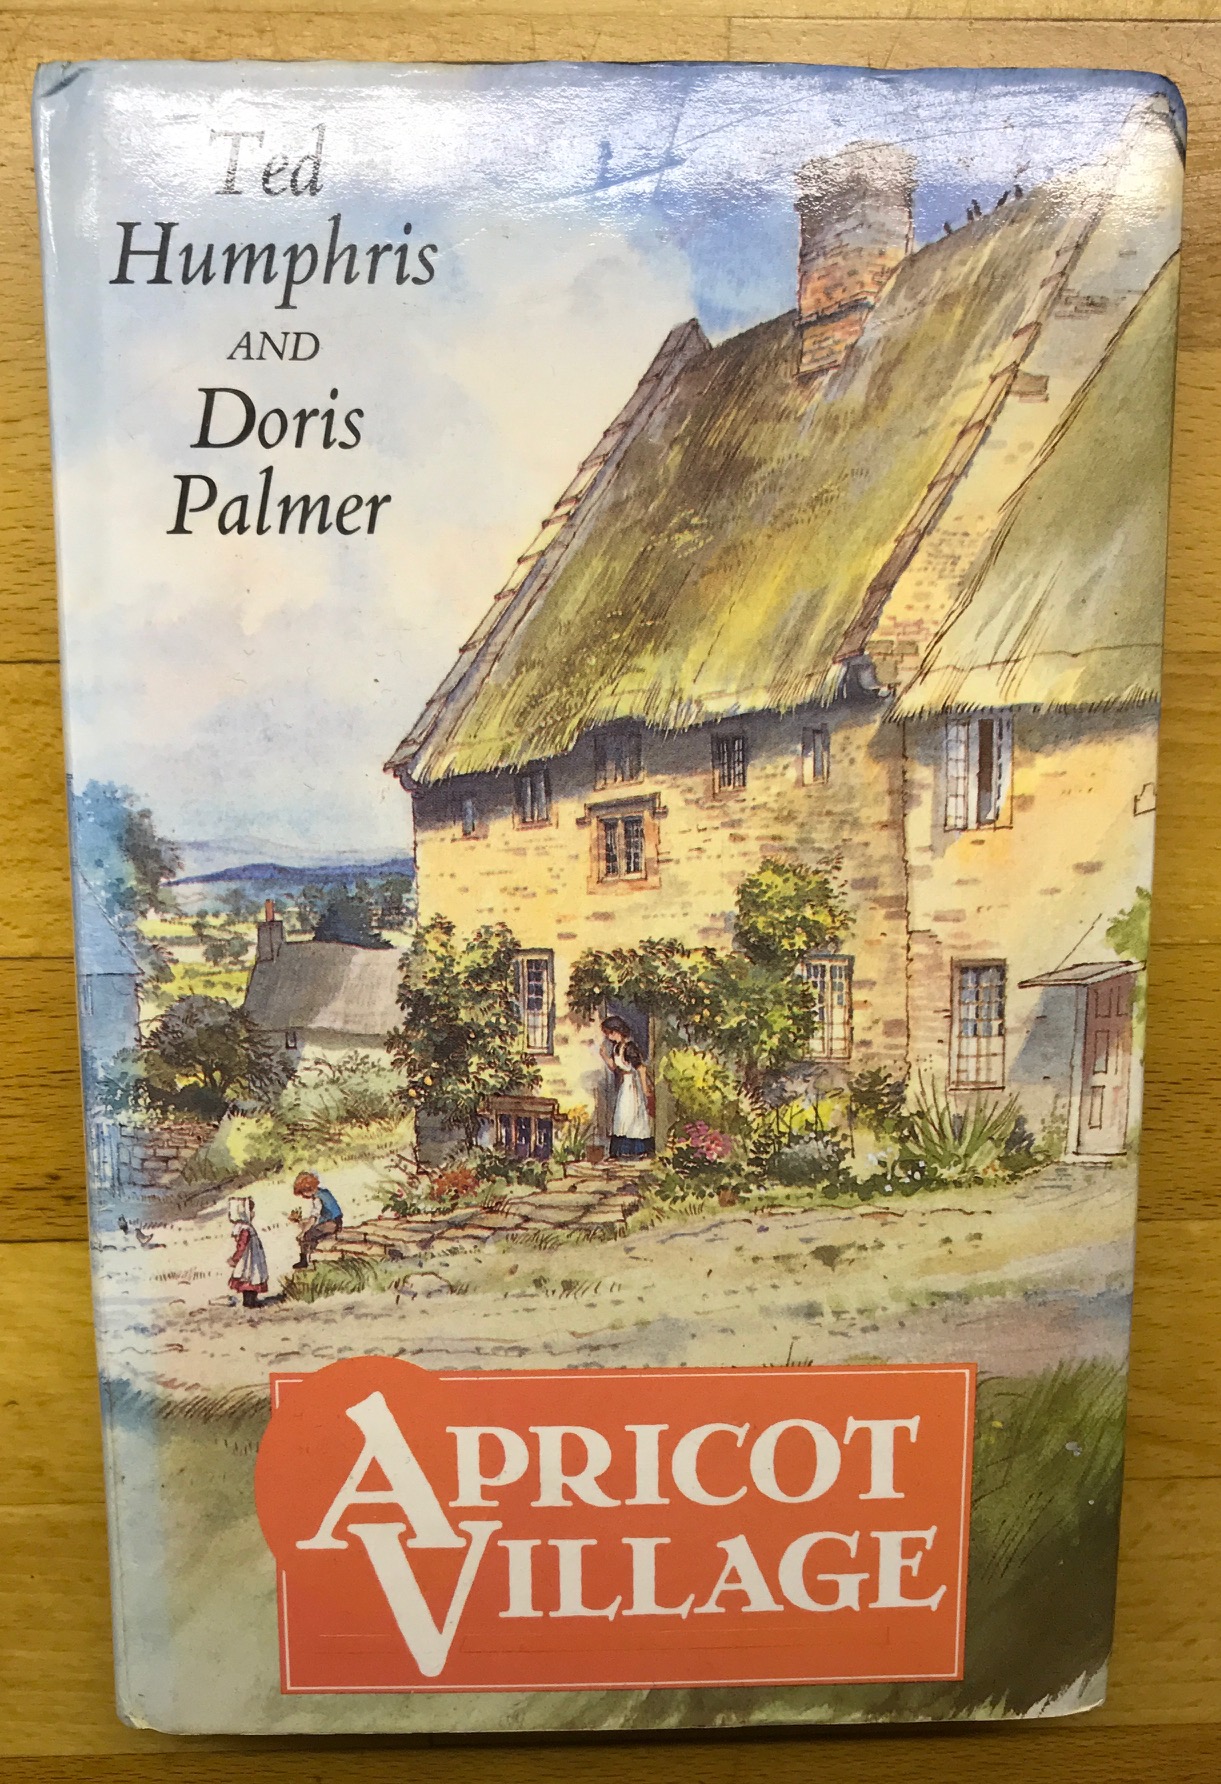 Apricot Village. By Ted Humphris and Doris Palmer.